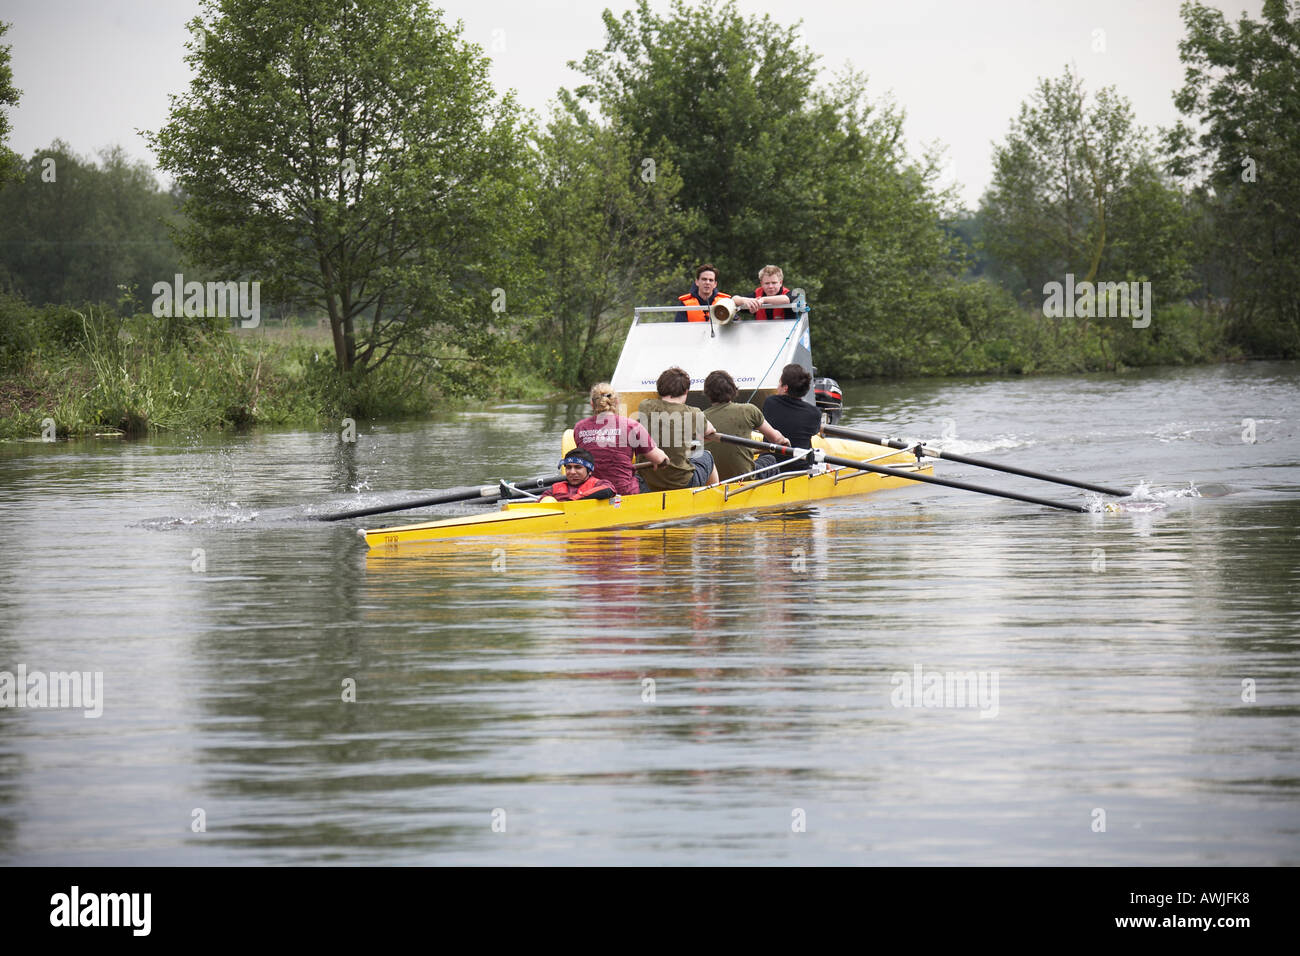 Coxed four rowing boat near Shiplake on River Thames between Buckinghamshire and Berkshire England UK Stock Photo